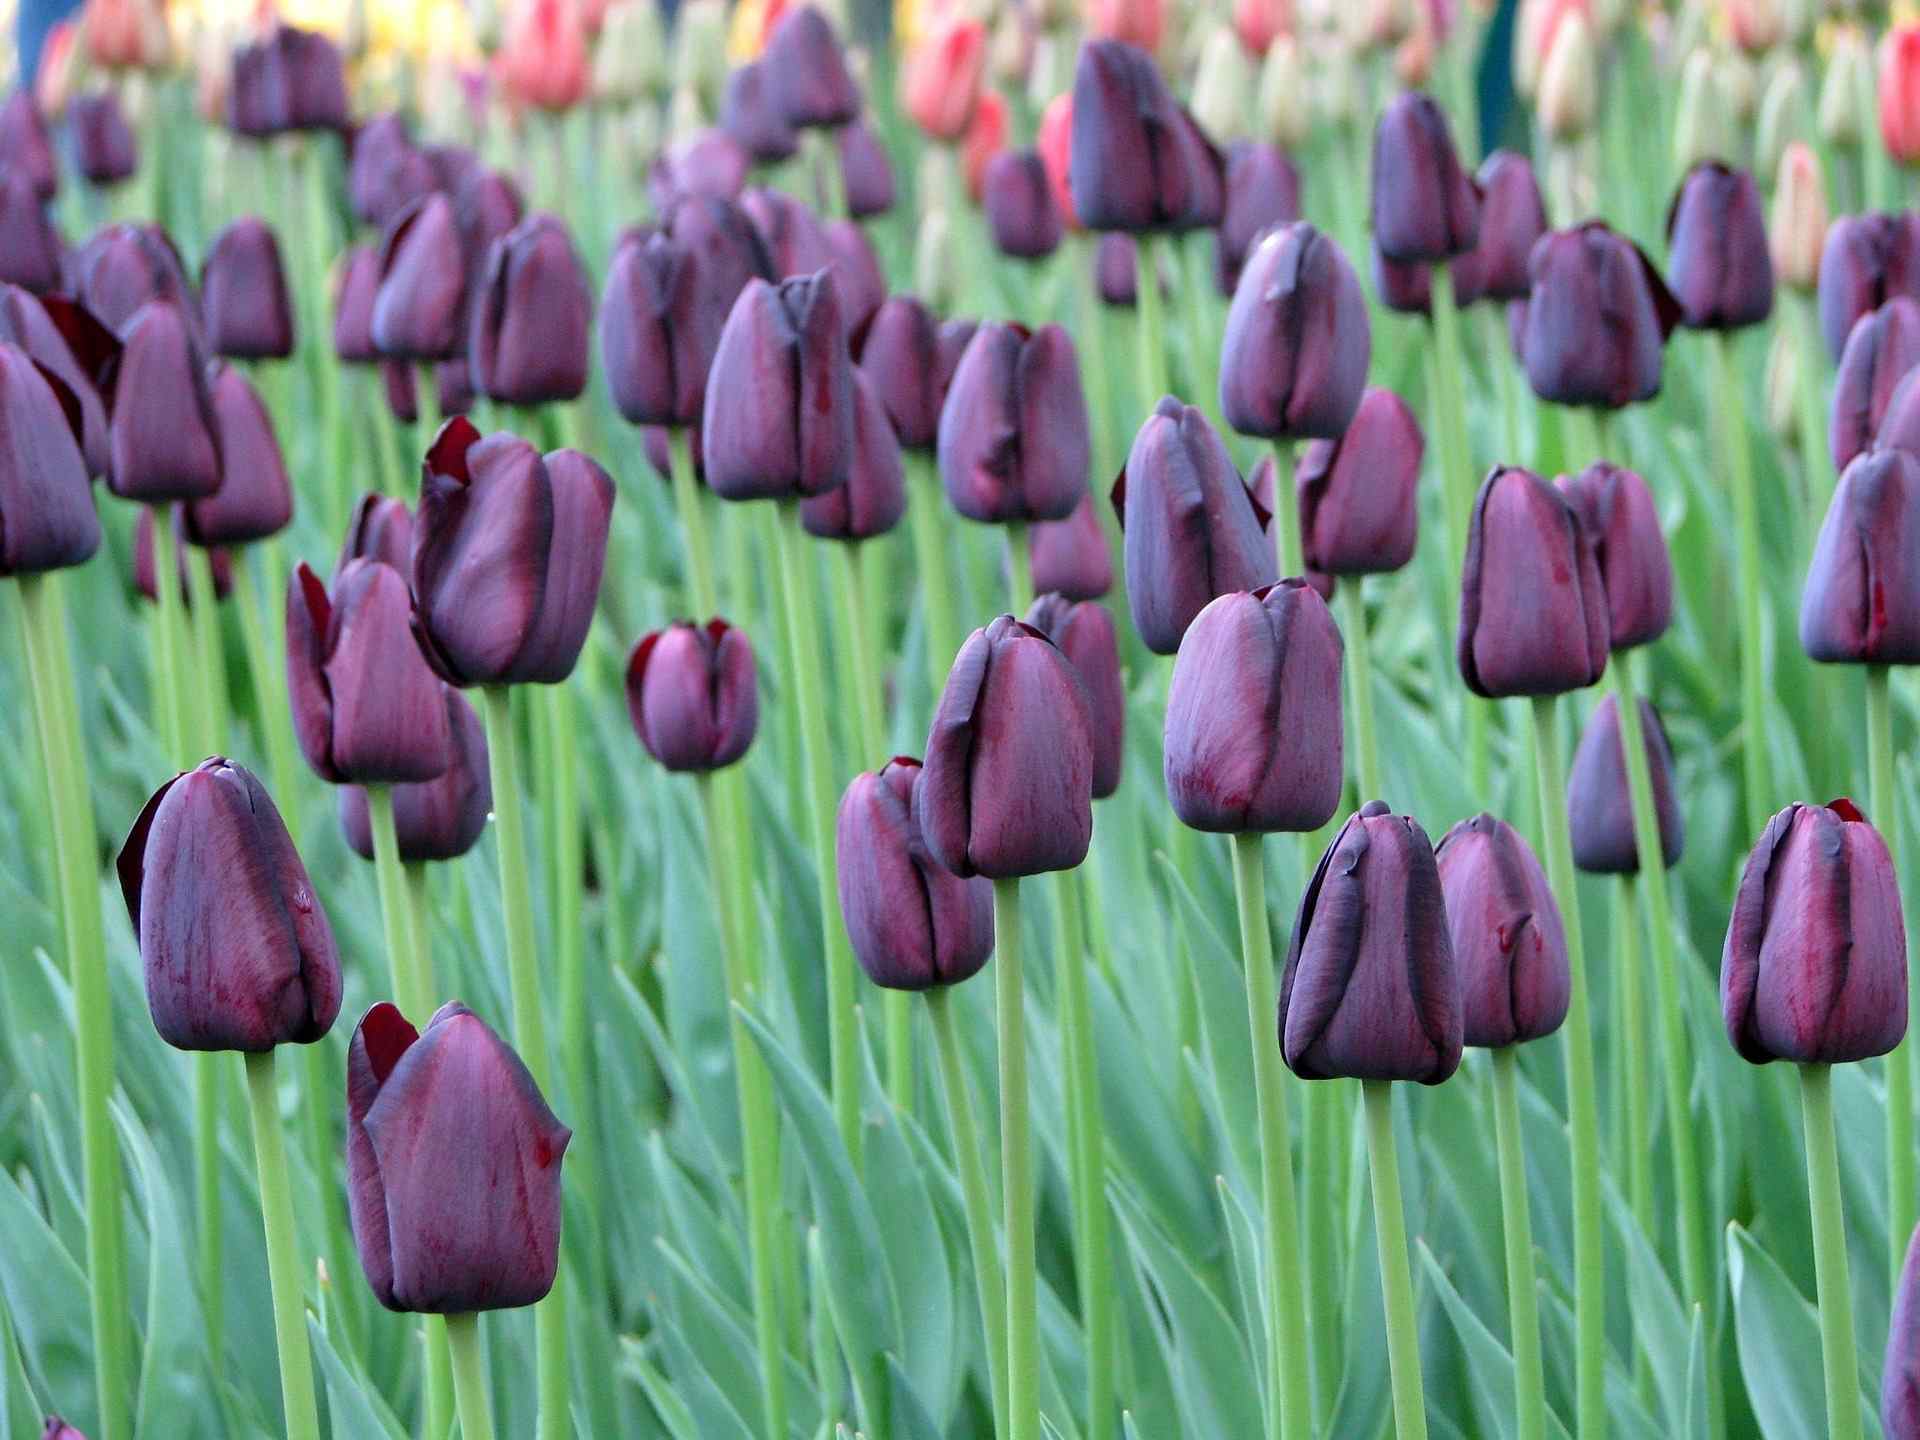 Guide to Seeing the Tulips Near Amsterdam